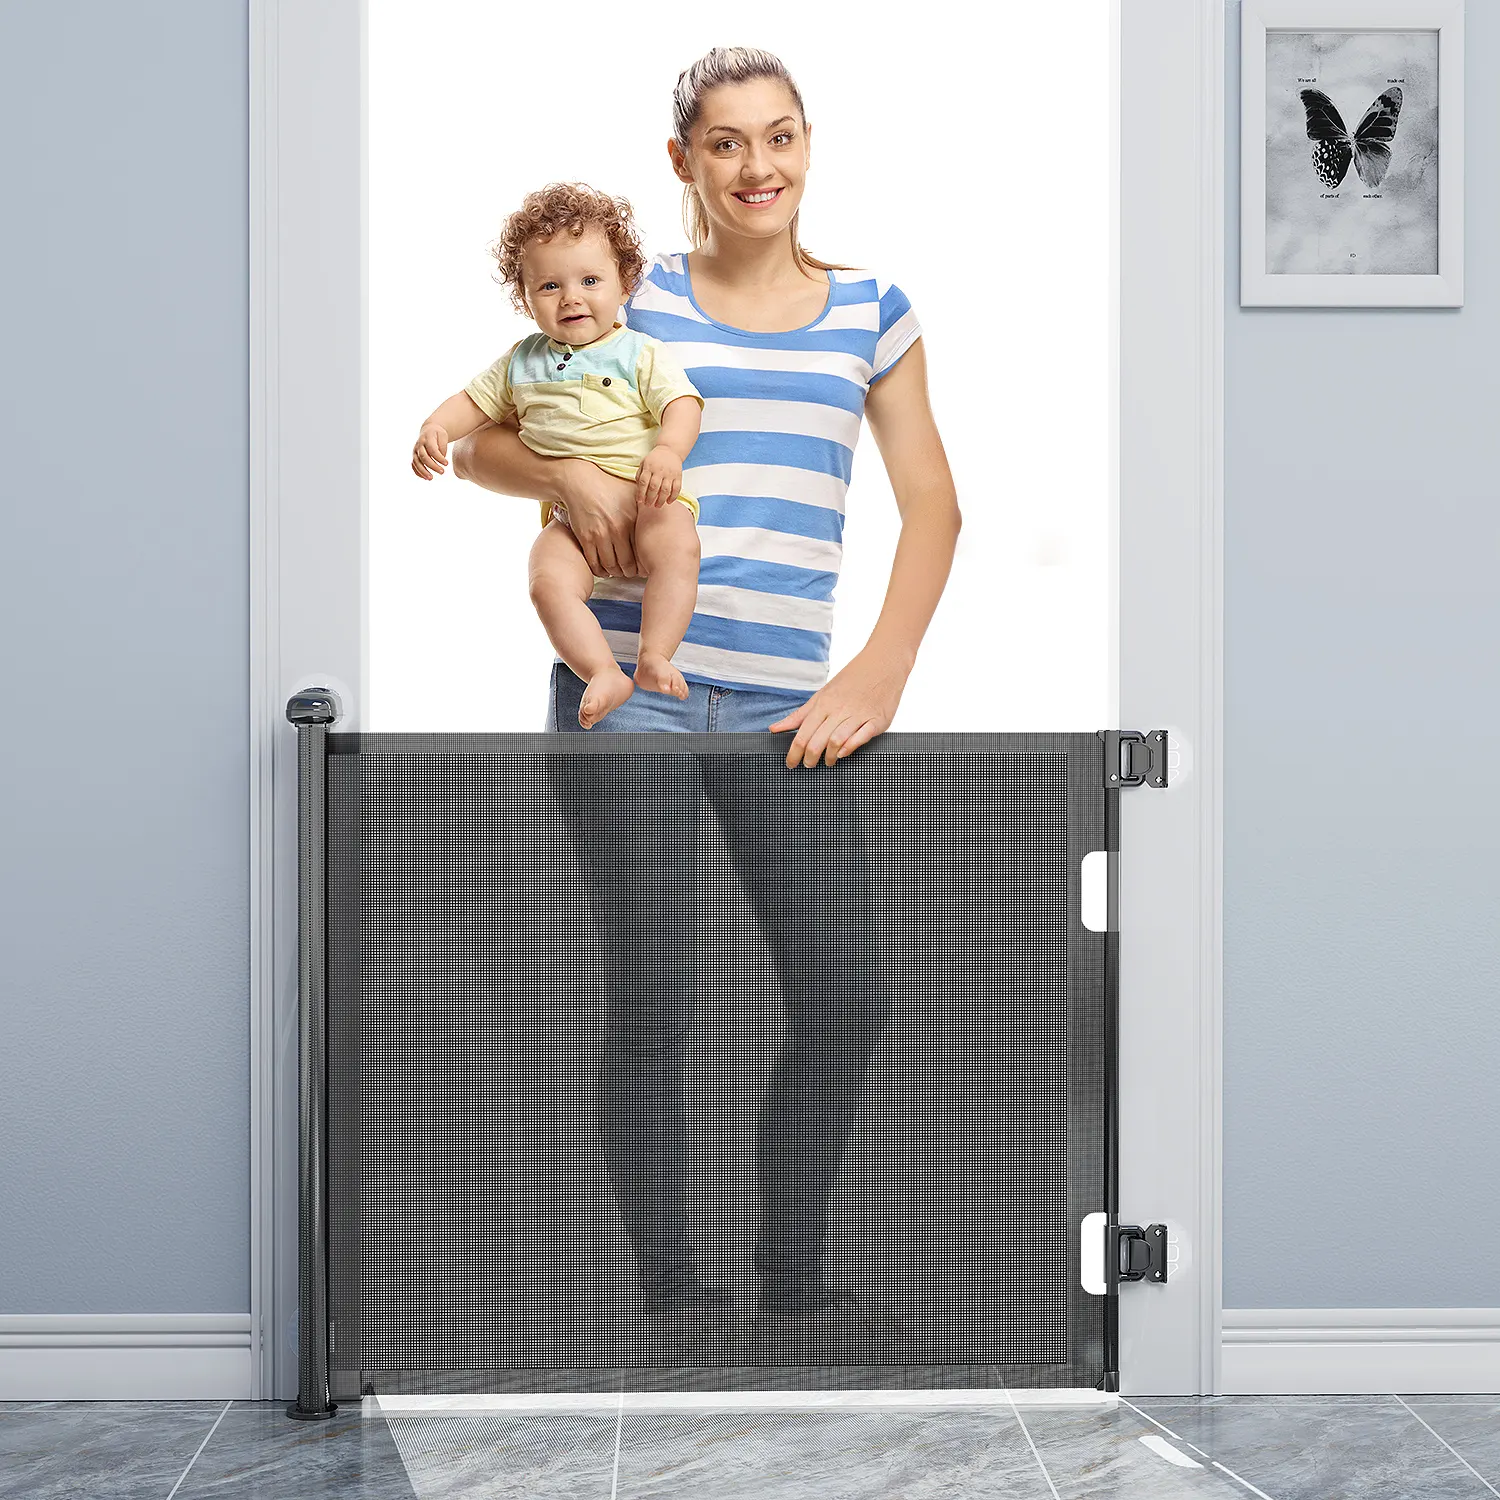 2023 new retractable mesh dog gate and acrylic baby safety gate pet gate Extra Wide55 X 33 Tall for doorways stairway hallways